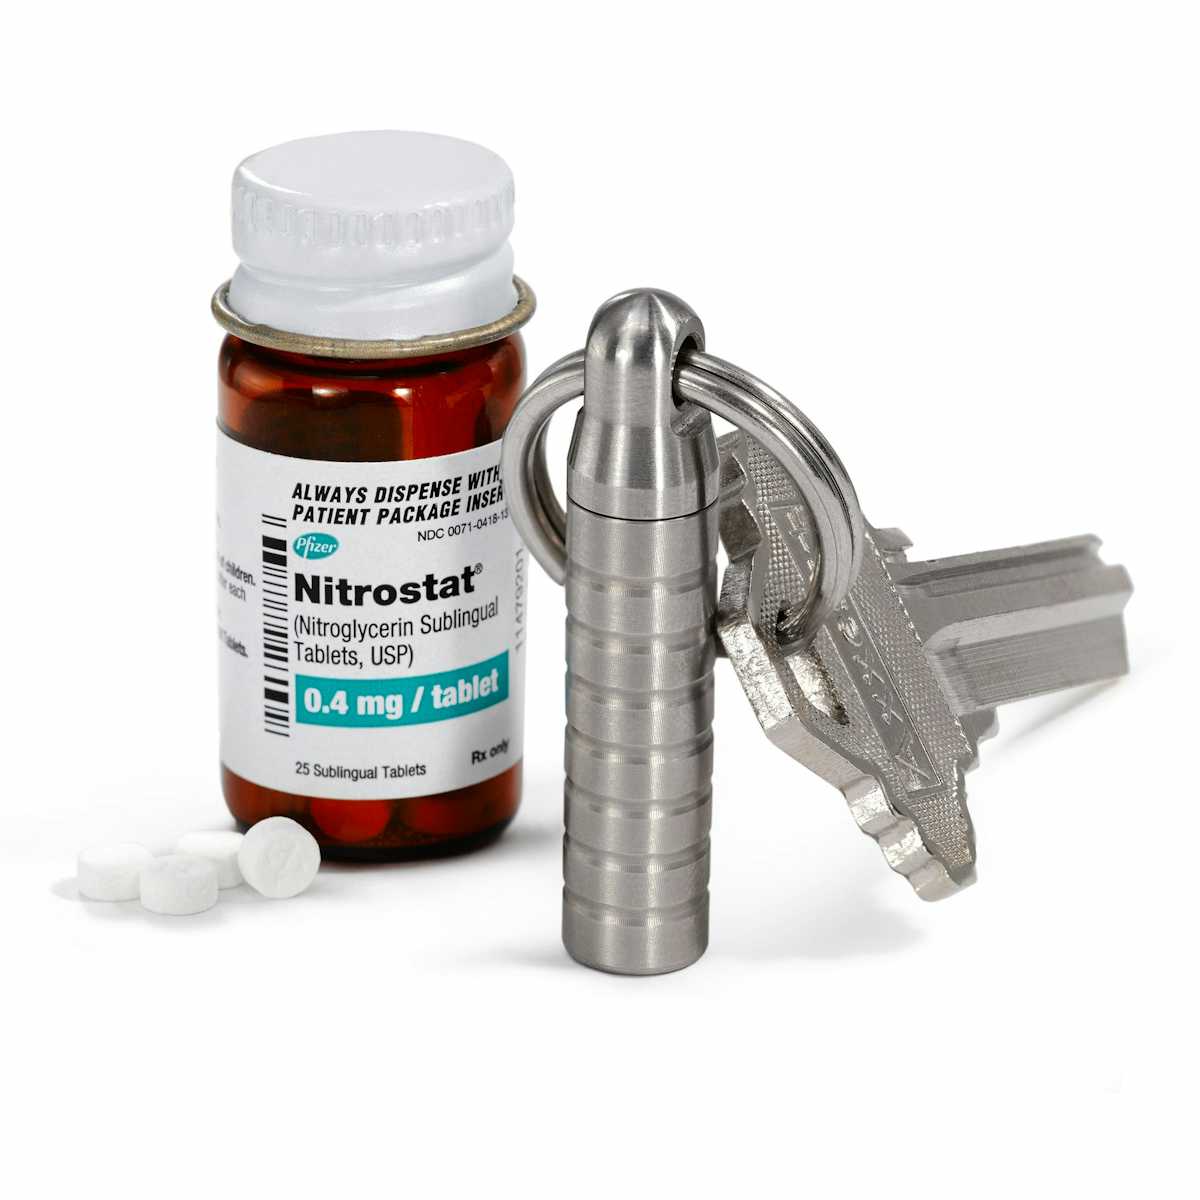 Best Nitro Pill Holder with keychain and a bottle of Nitrostat- Stainless Steel and Titanium - Cielo Pill Holders